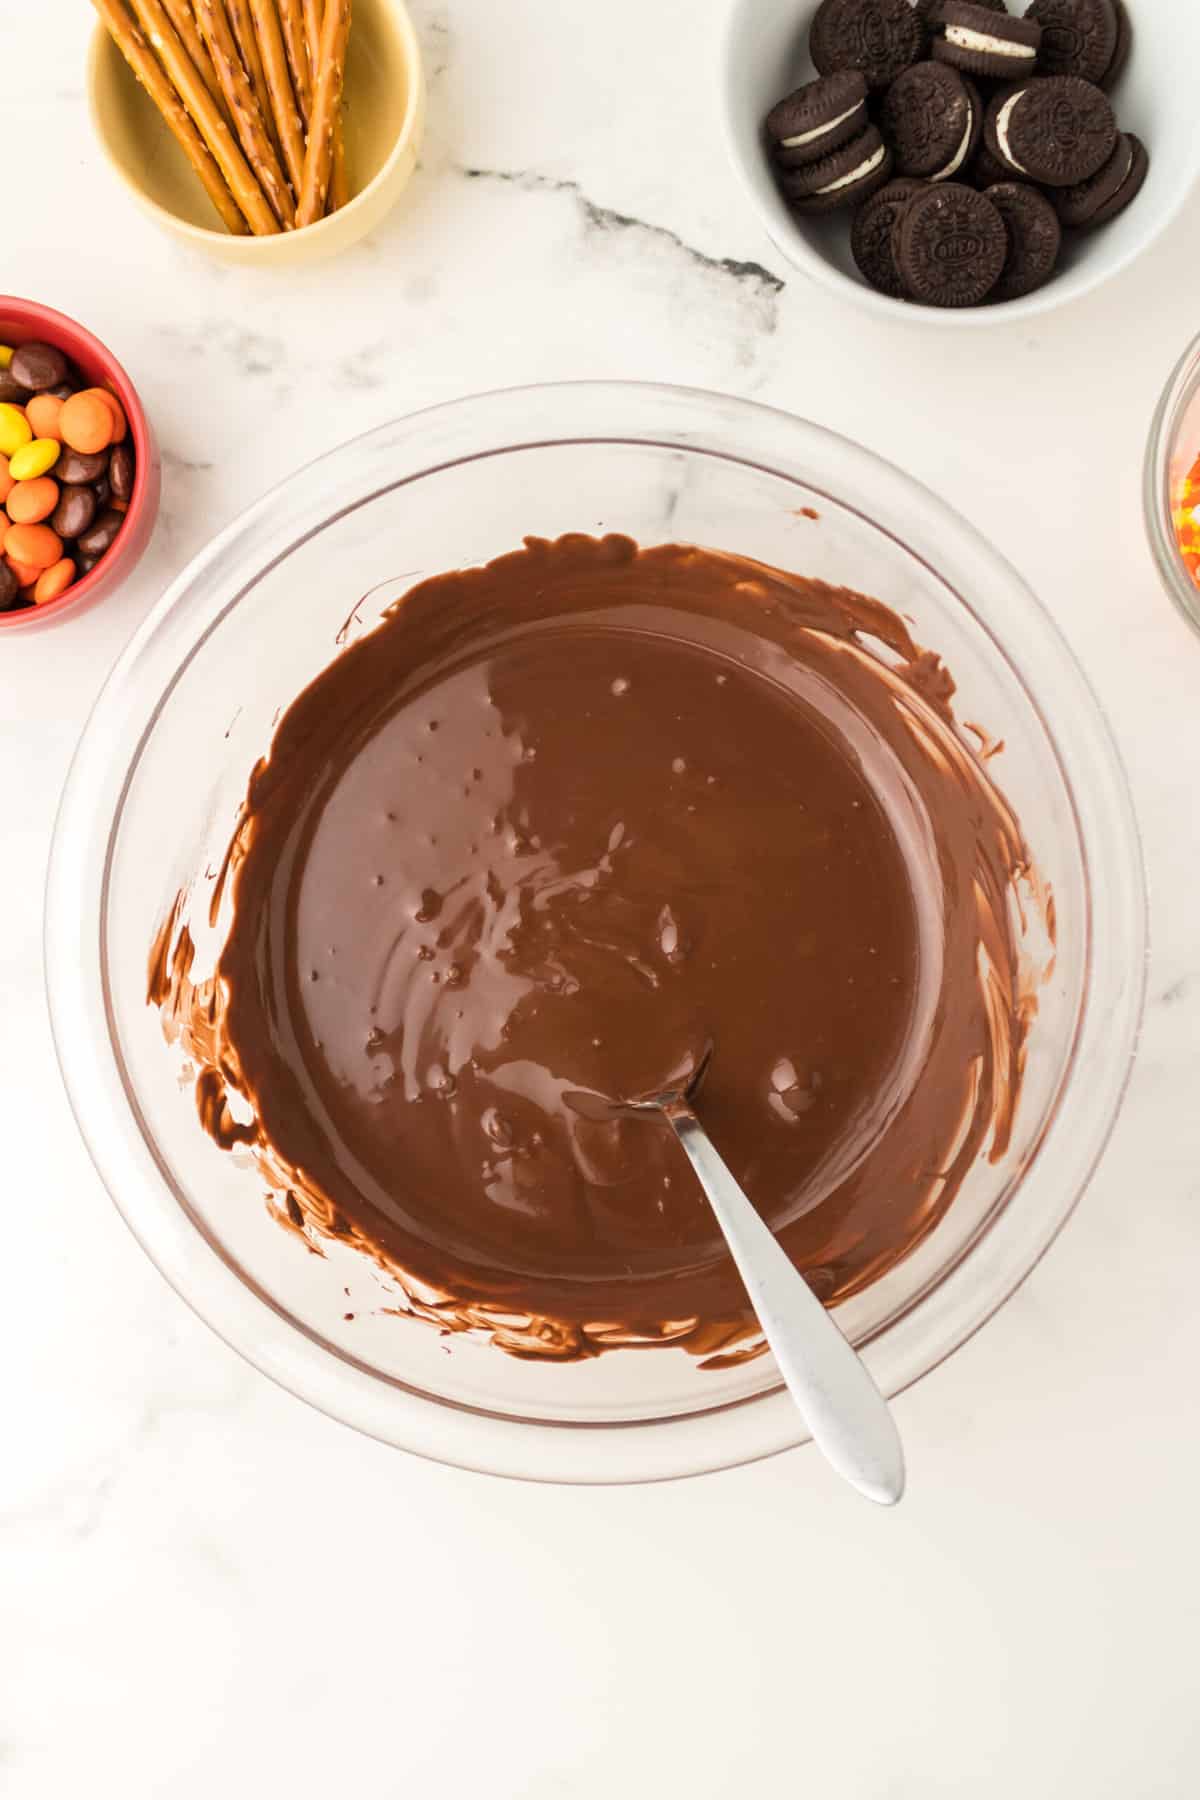 In a Microwave safe bowl, melt the chocolate Wafers Slowly, stirring frequently.